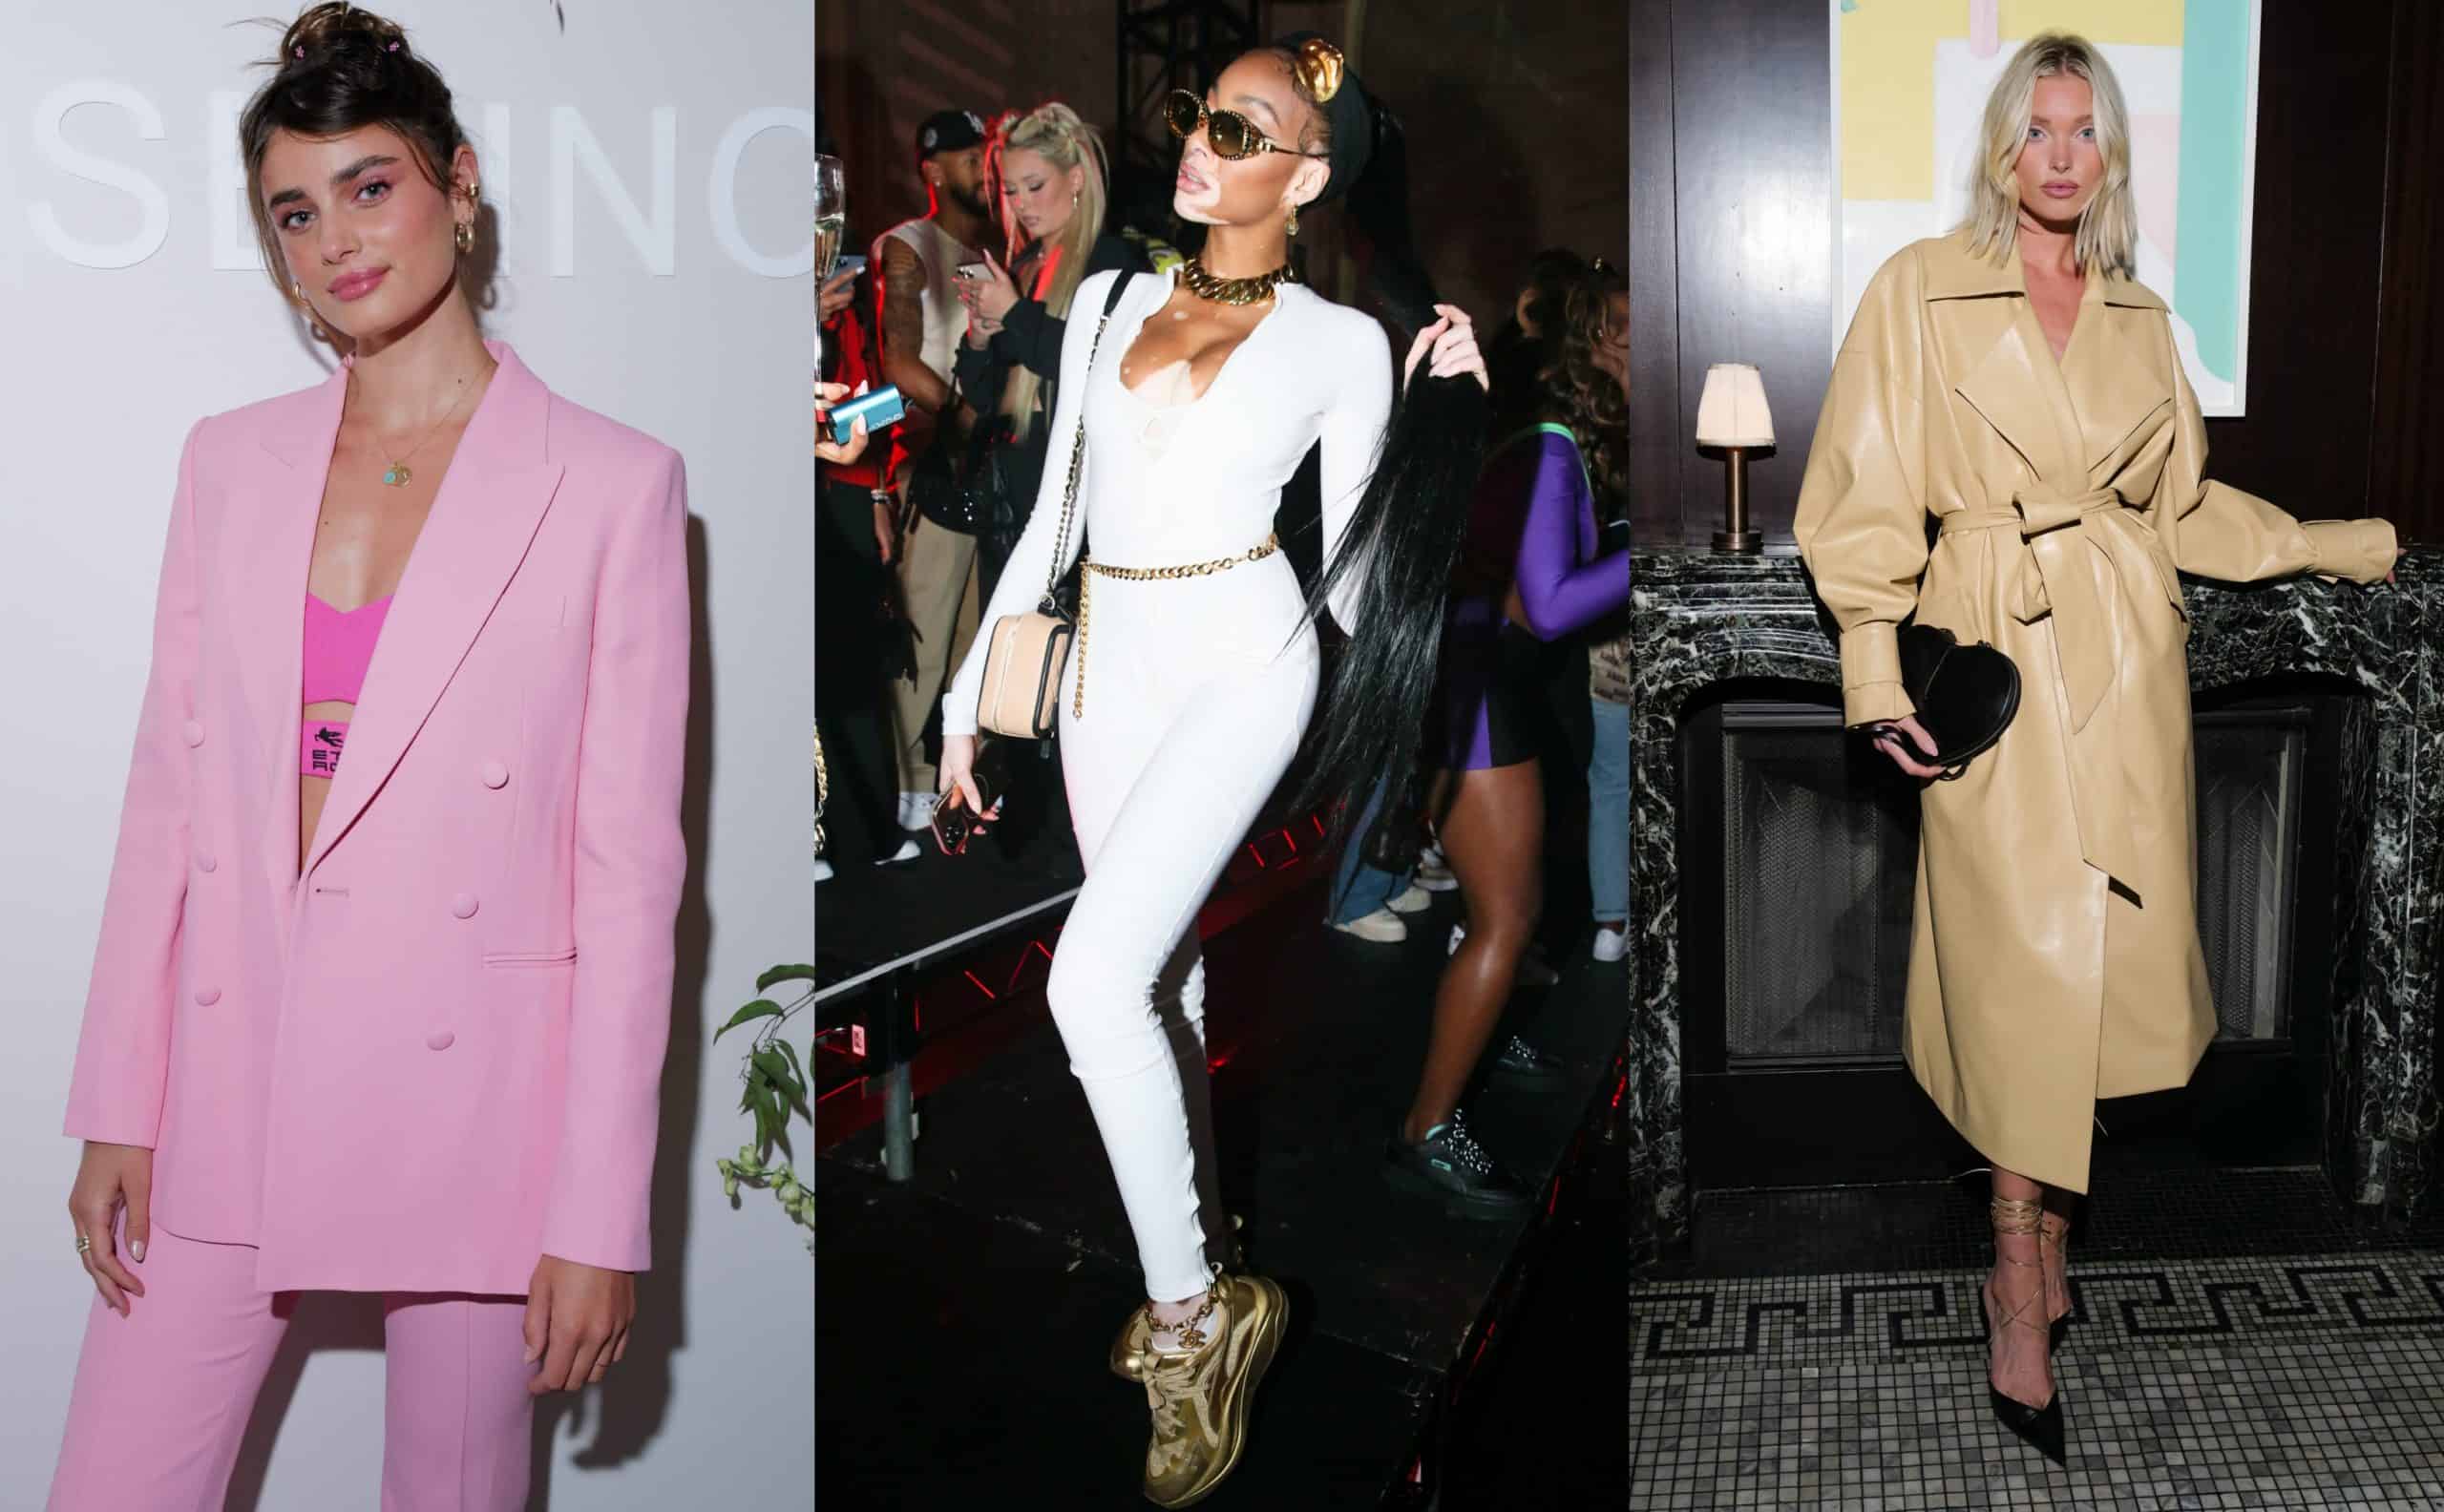 Here's What's Going Down at Louis Vuitton's Tribute In Sydney